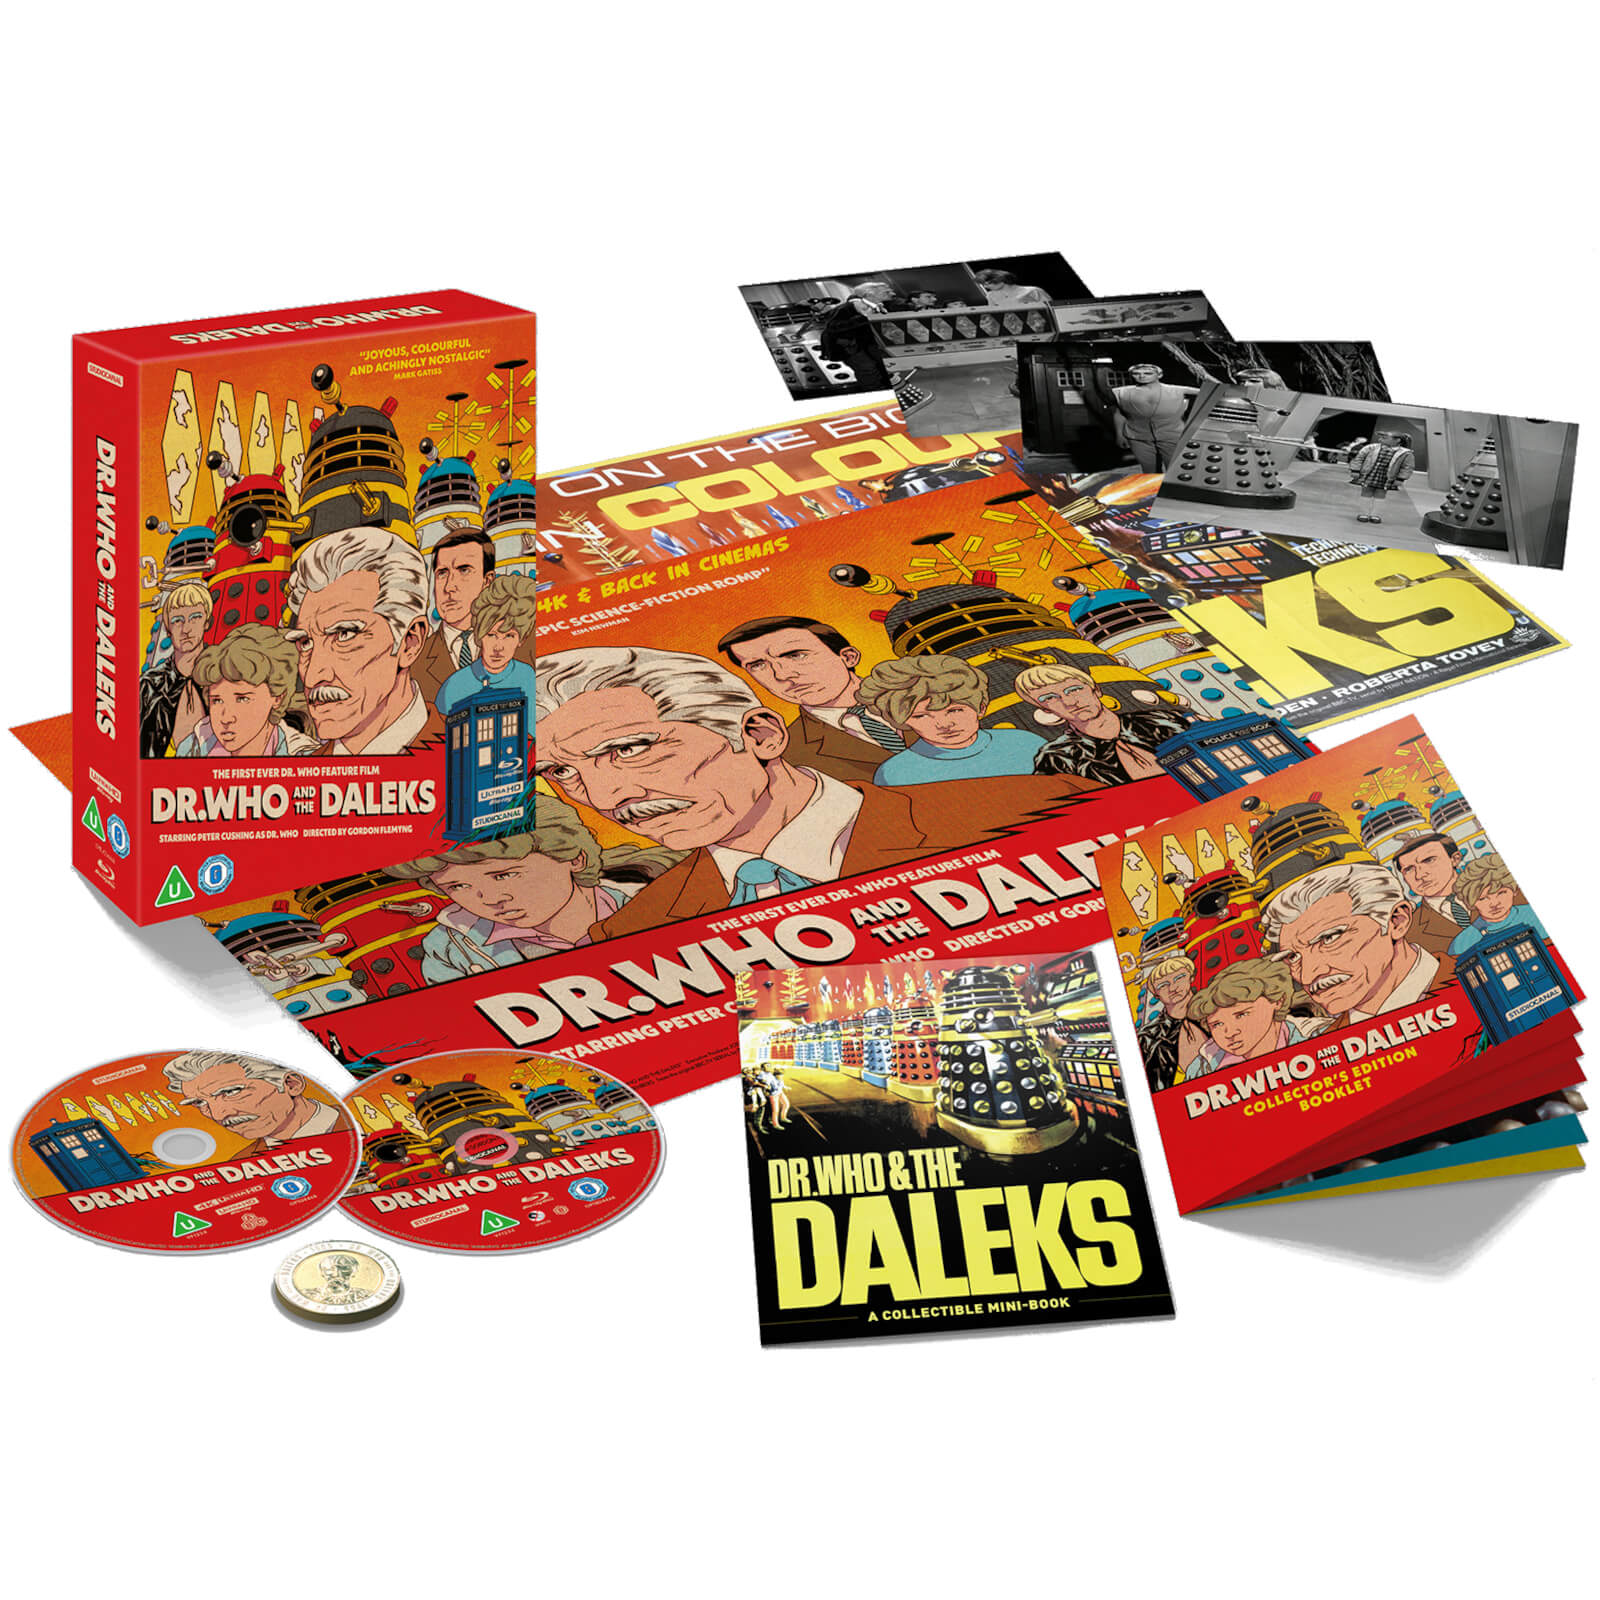 Dr. Who and the Daleks 4K Ultra HD Collector's Edition (includes Blu-ray)